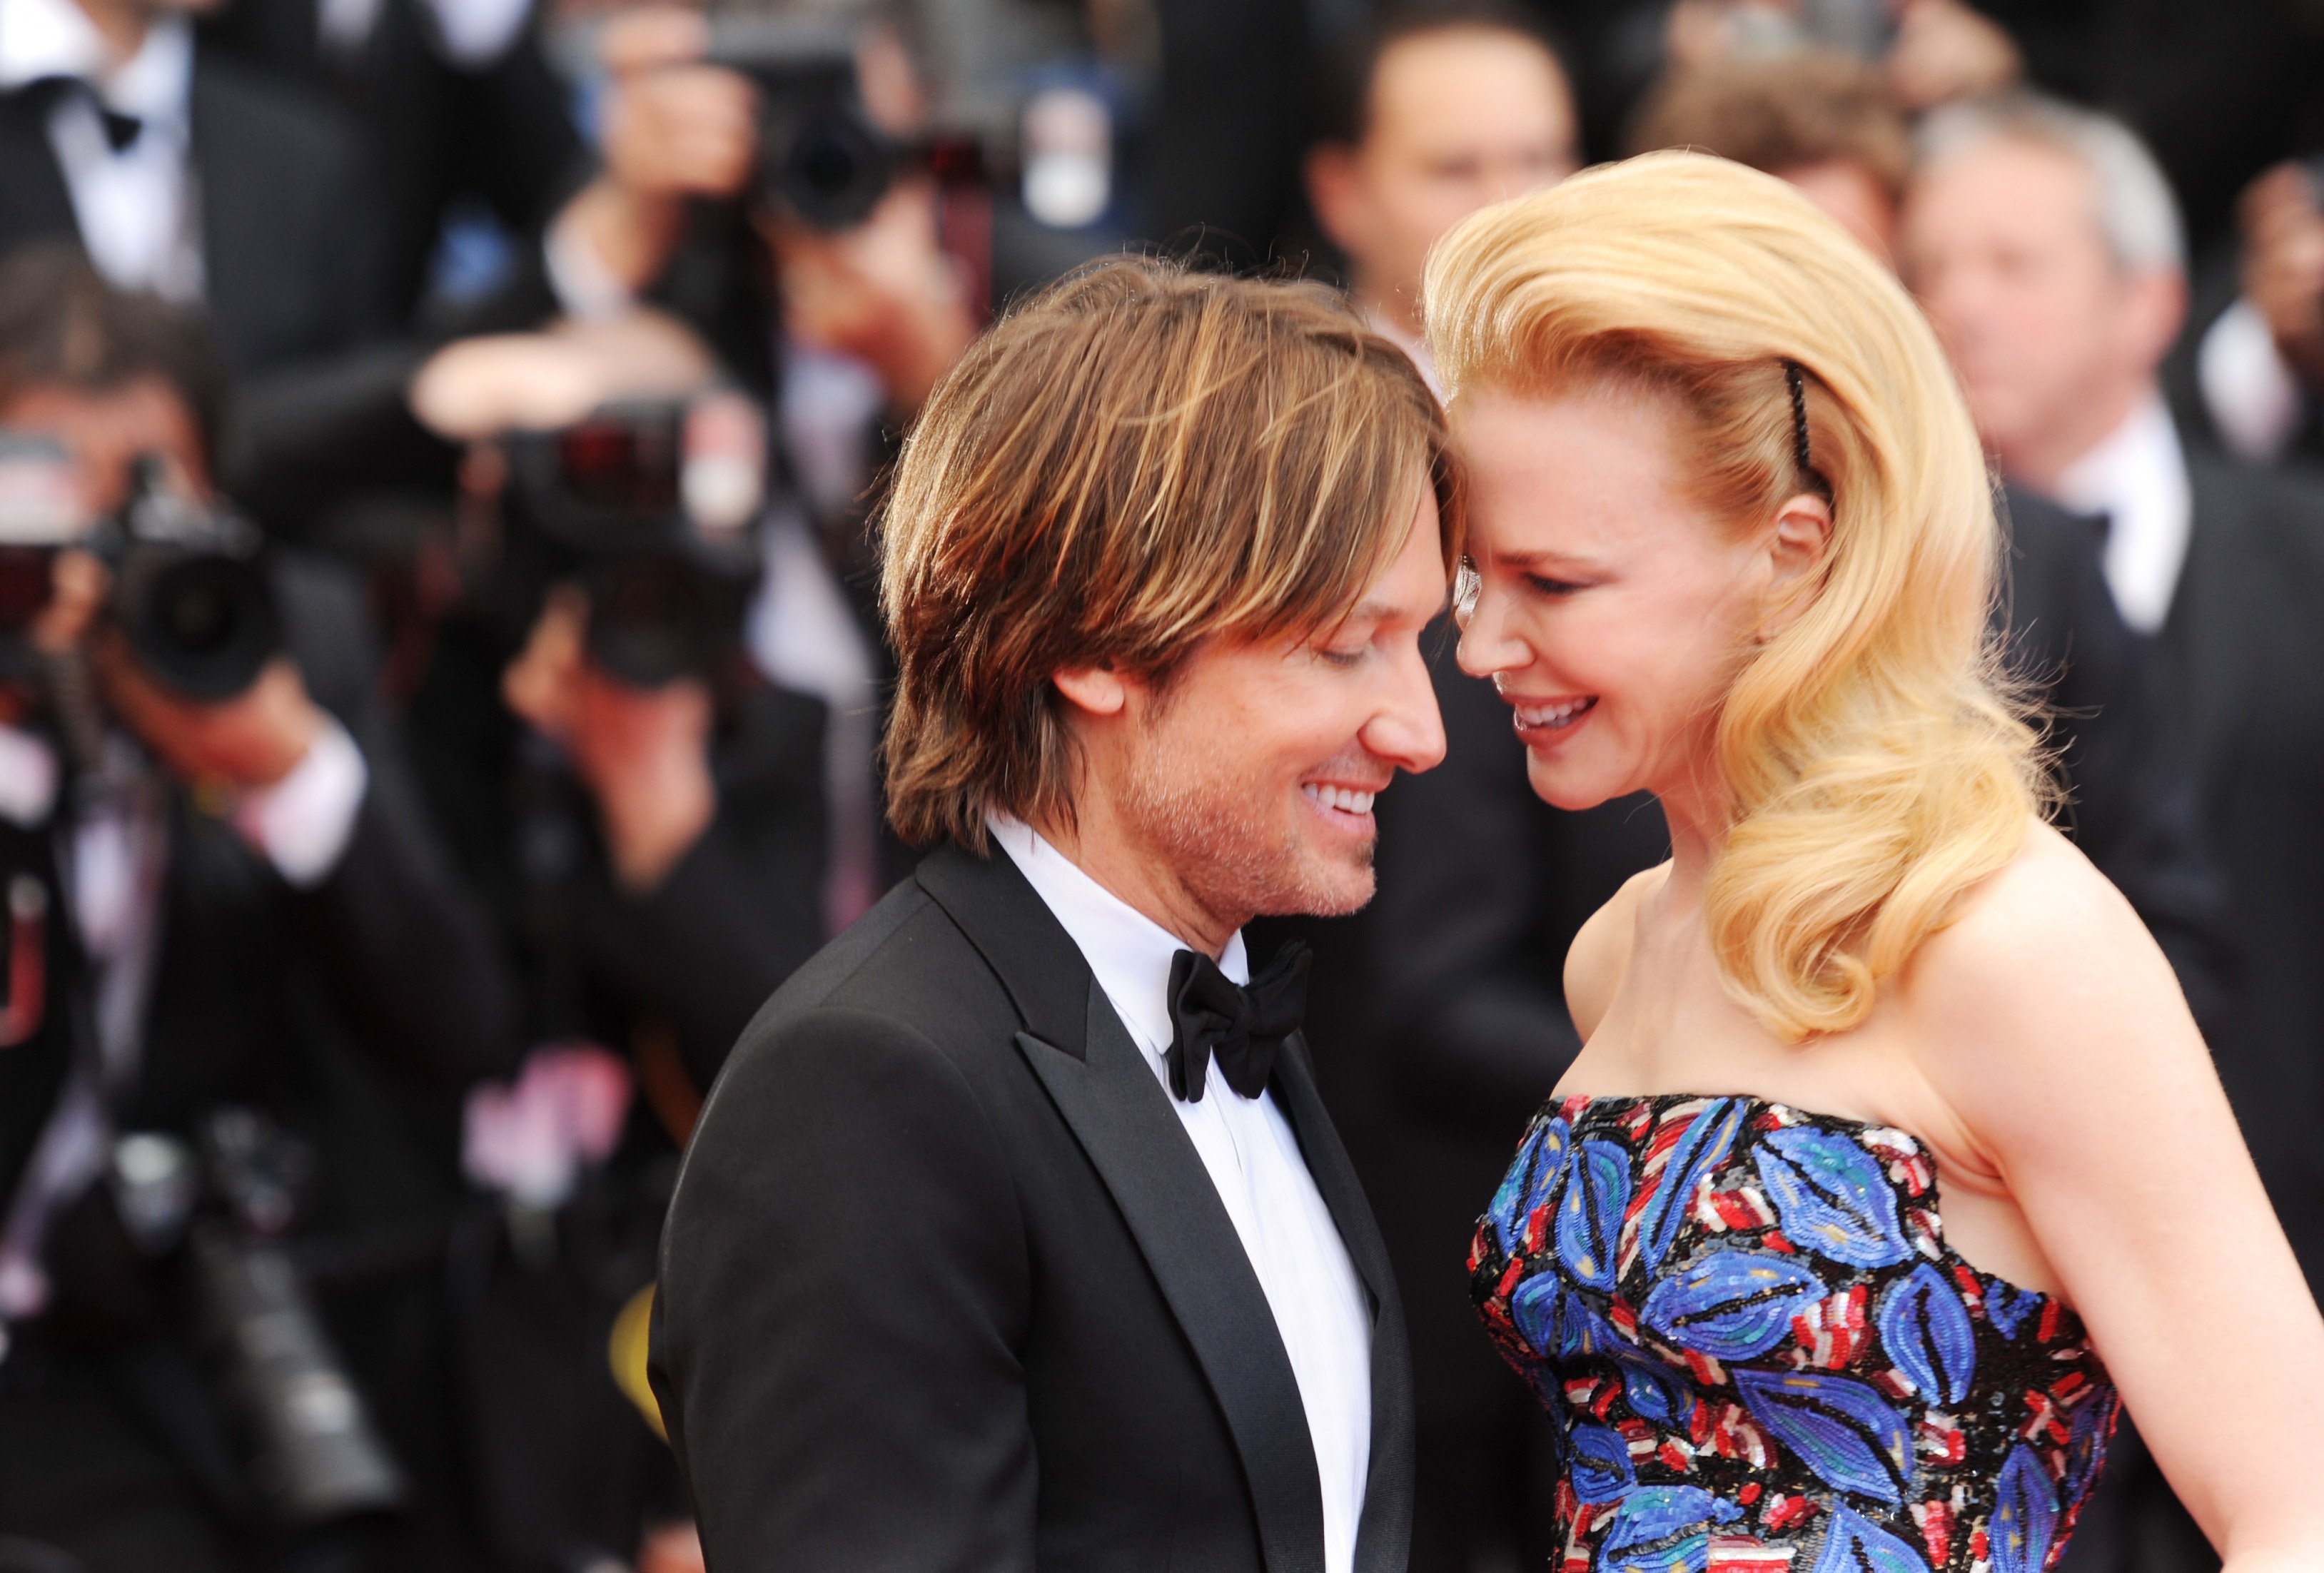 Keith Urban and Nicole Kidman during the 66th Annual Cannes Film Festival on May 19, 2013 in Cannes, France. | Source: Getty Images 